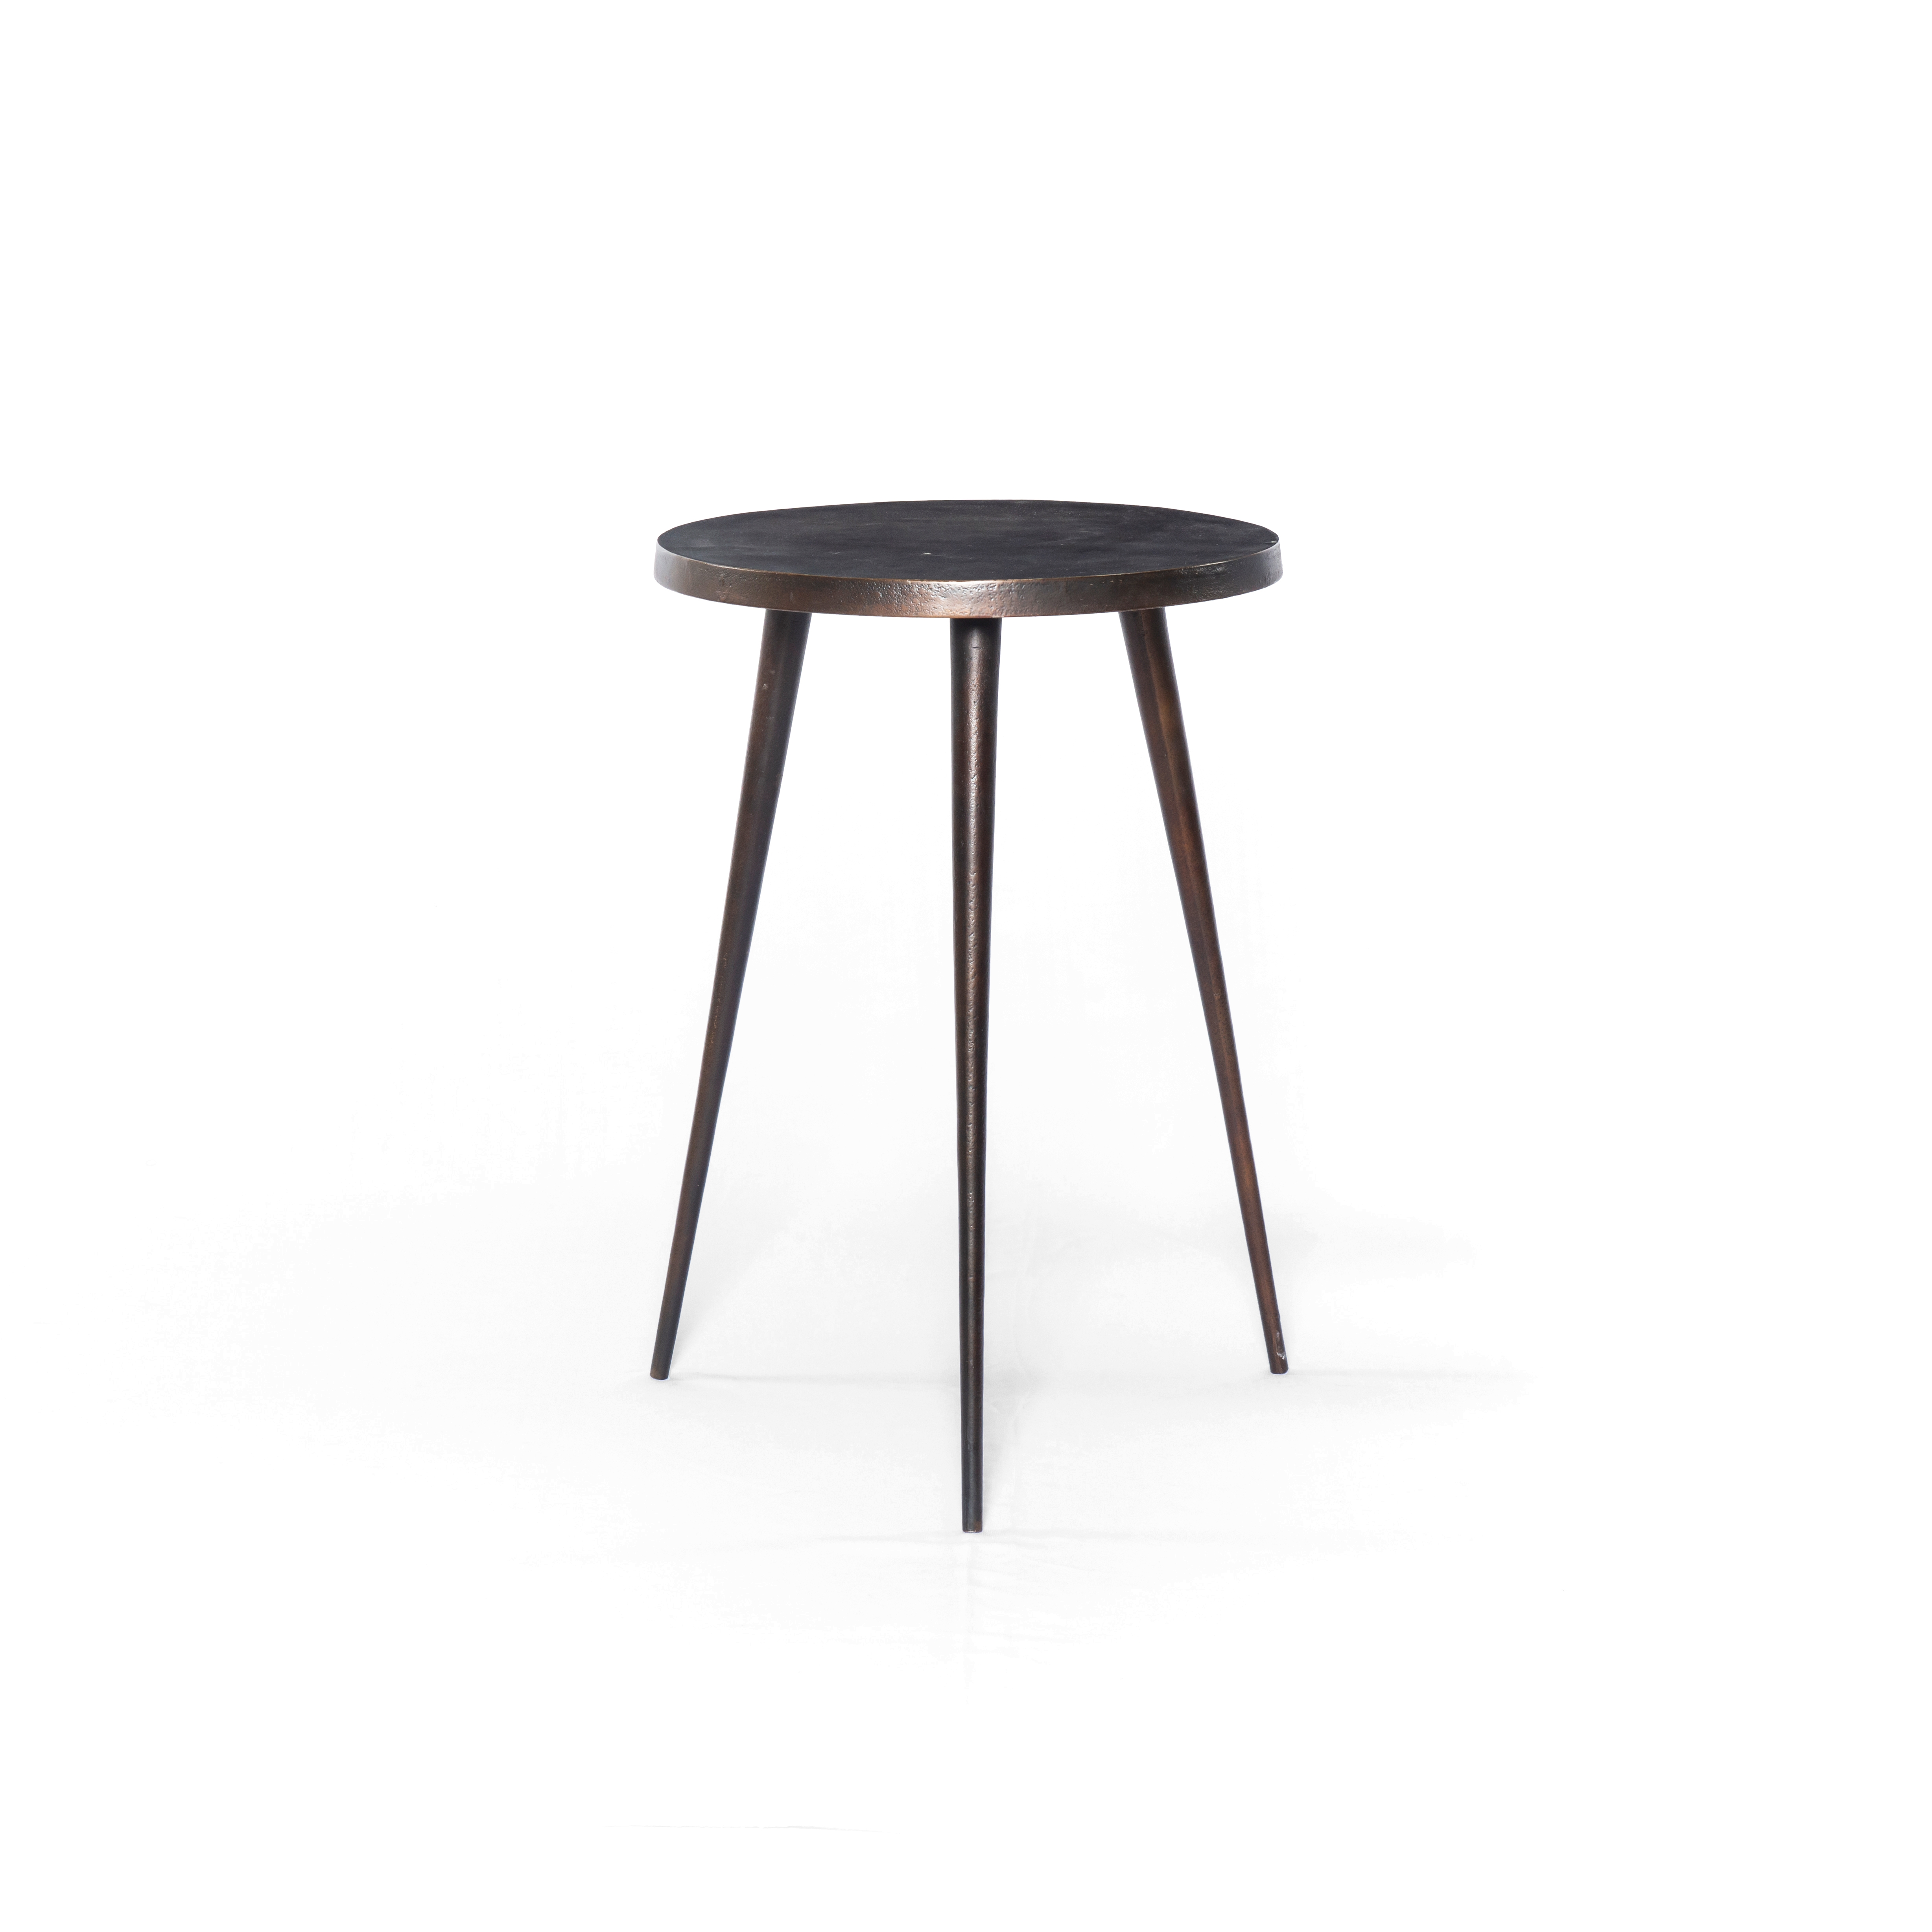 Casted Tripod Aluminum Outdoor End Table